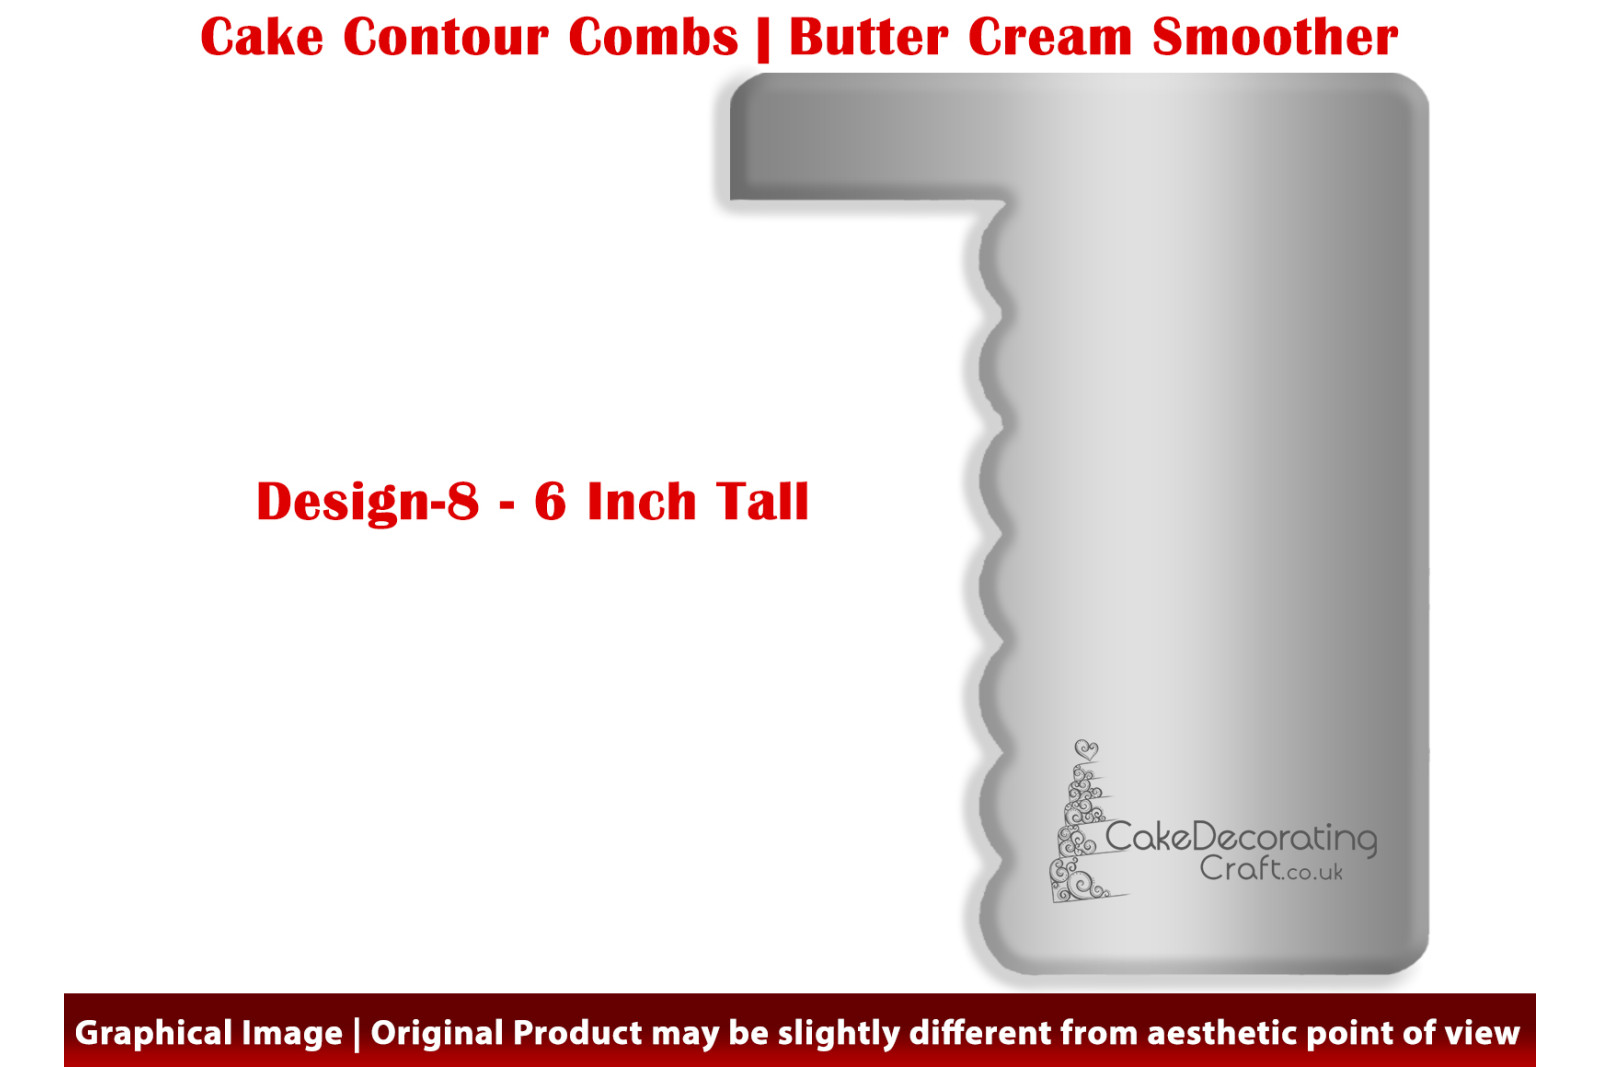 Fabulous Facets Design 1 | 6 Inch | Cake Decorating Craft | Cake Contour Combs | Smoothing | Metal Spreader | Butter Cream Smoothing | Genius Tool